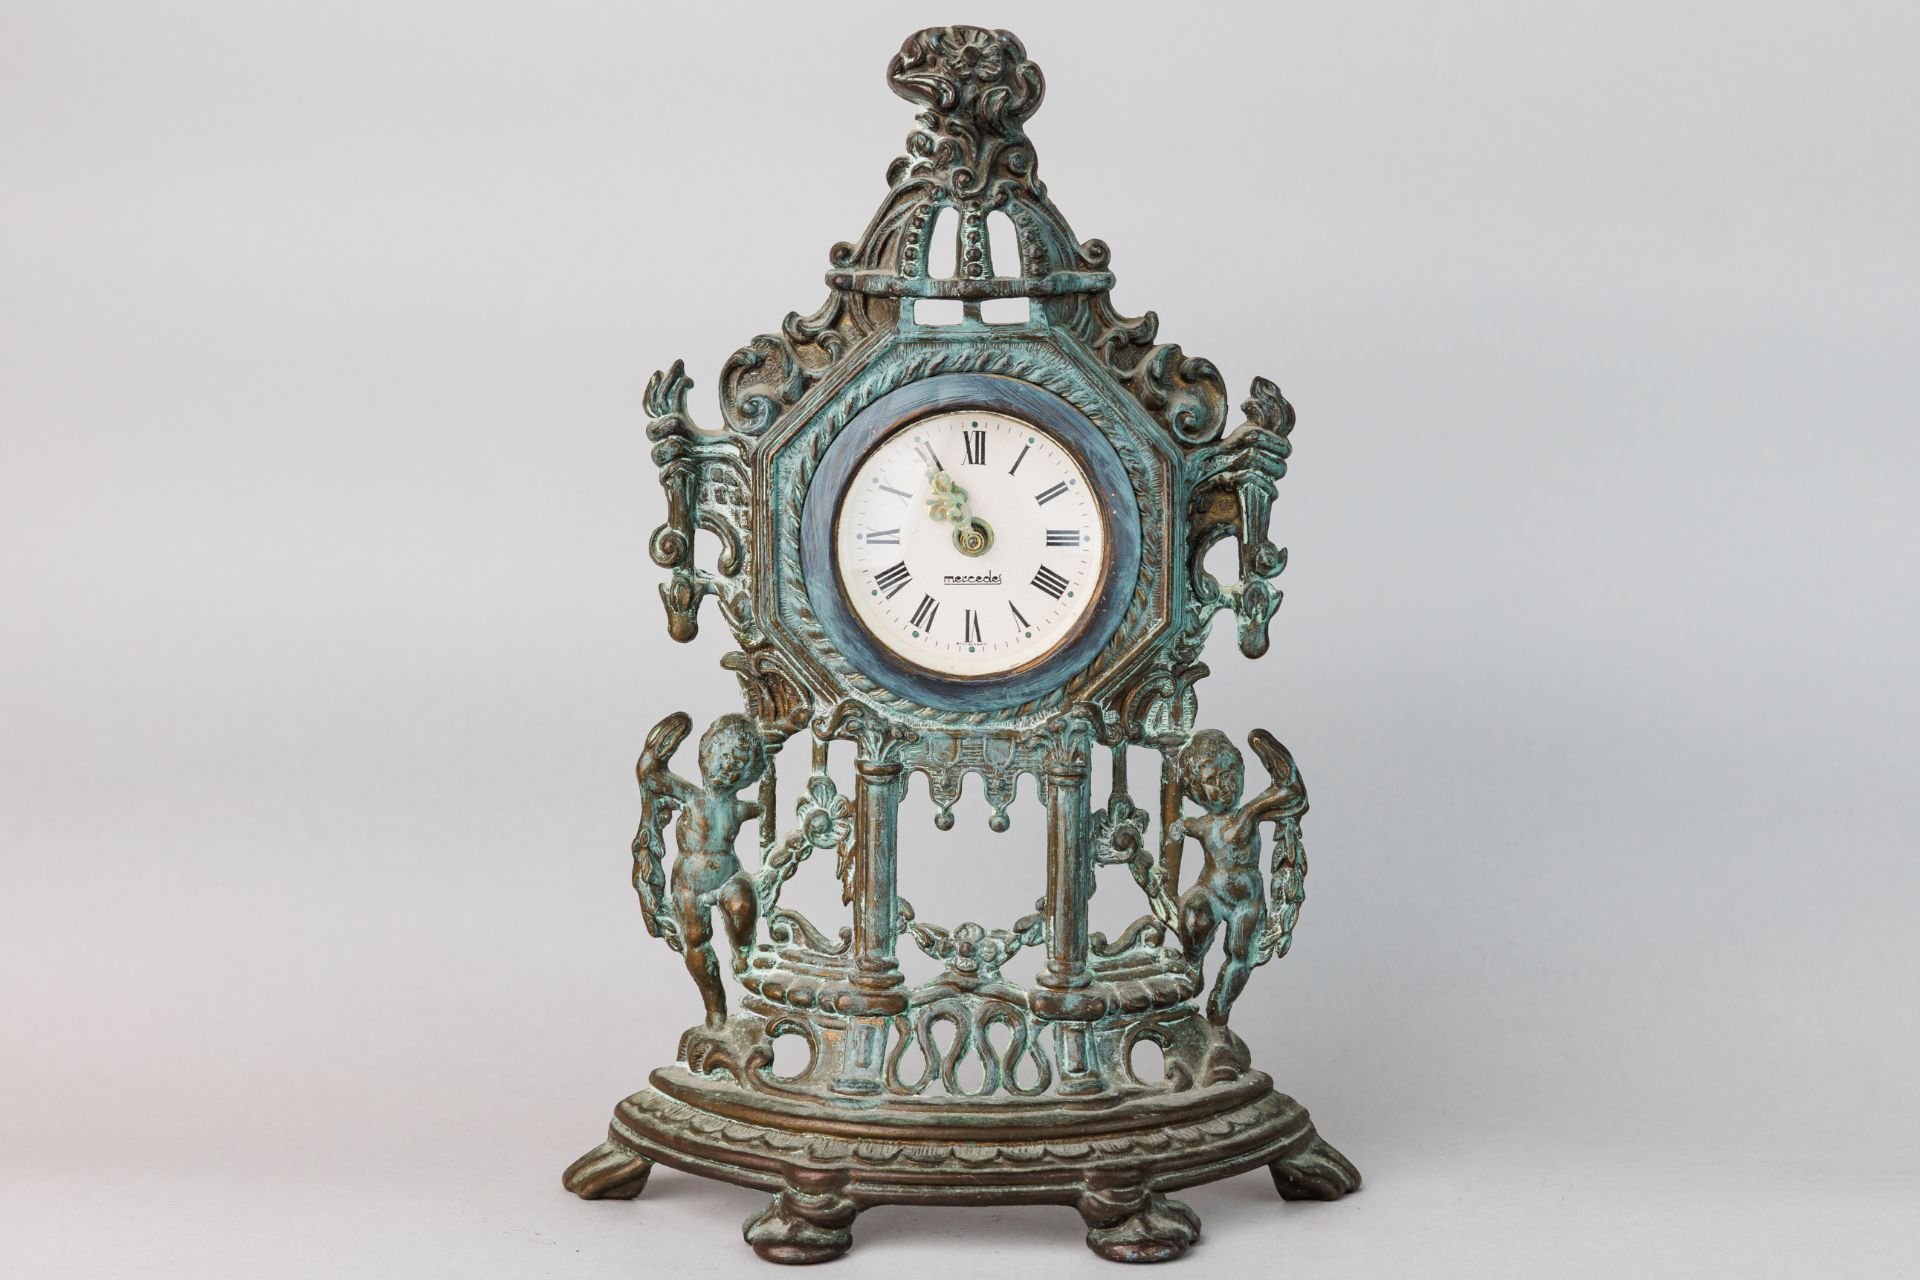 Ornated Table Clock